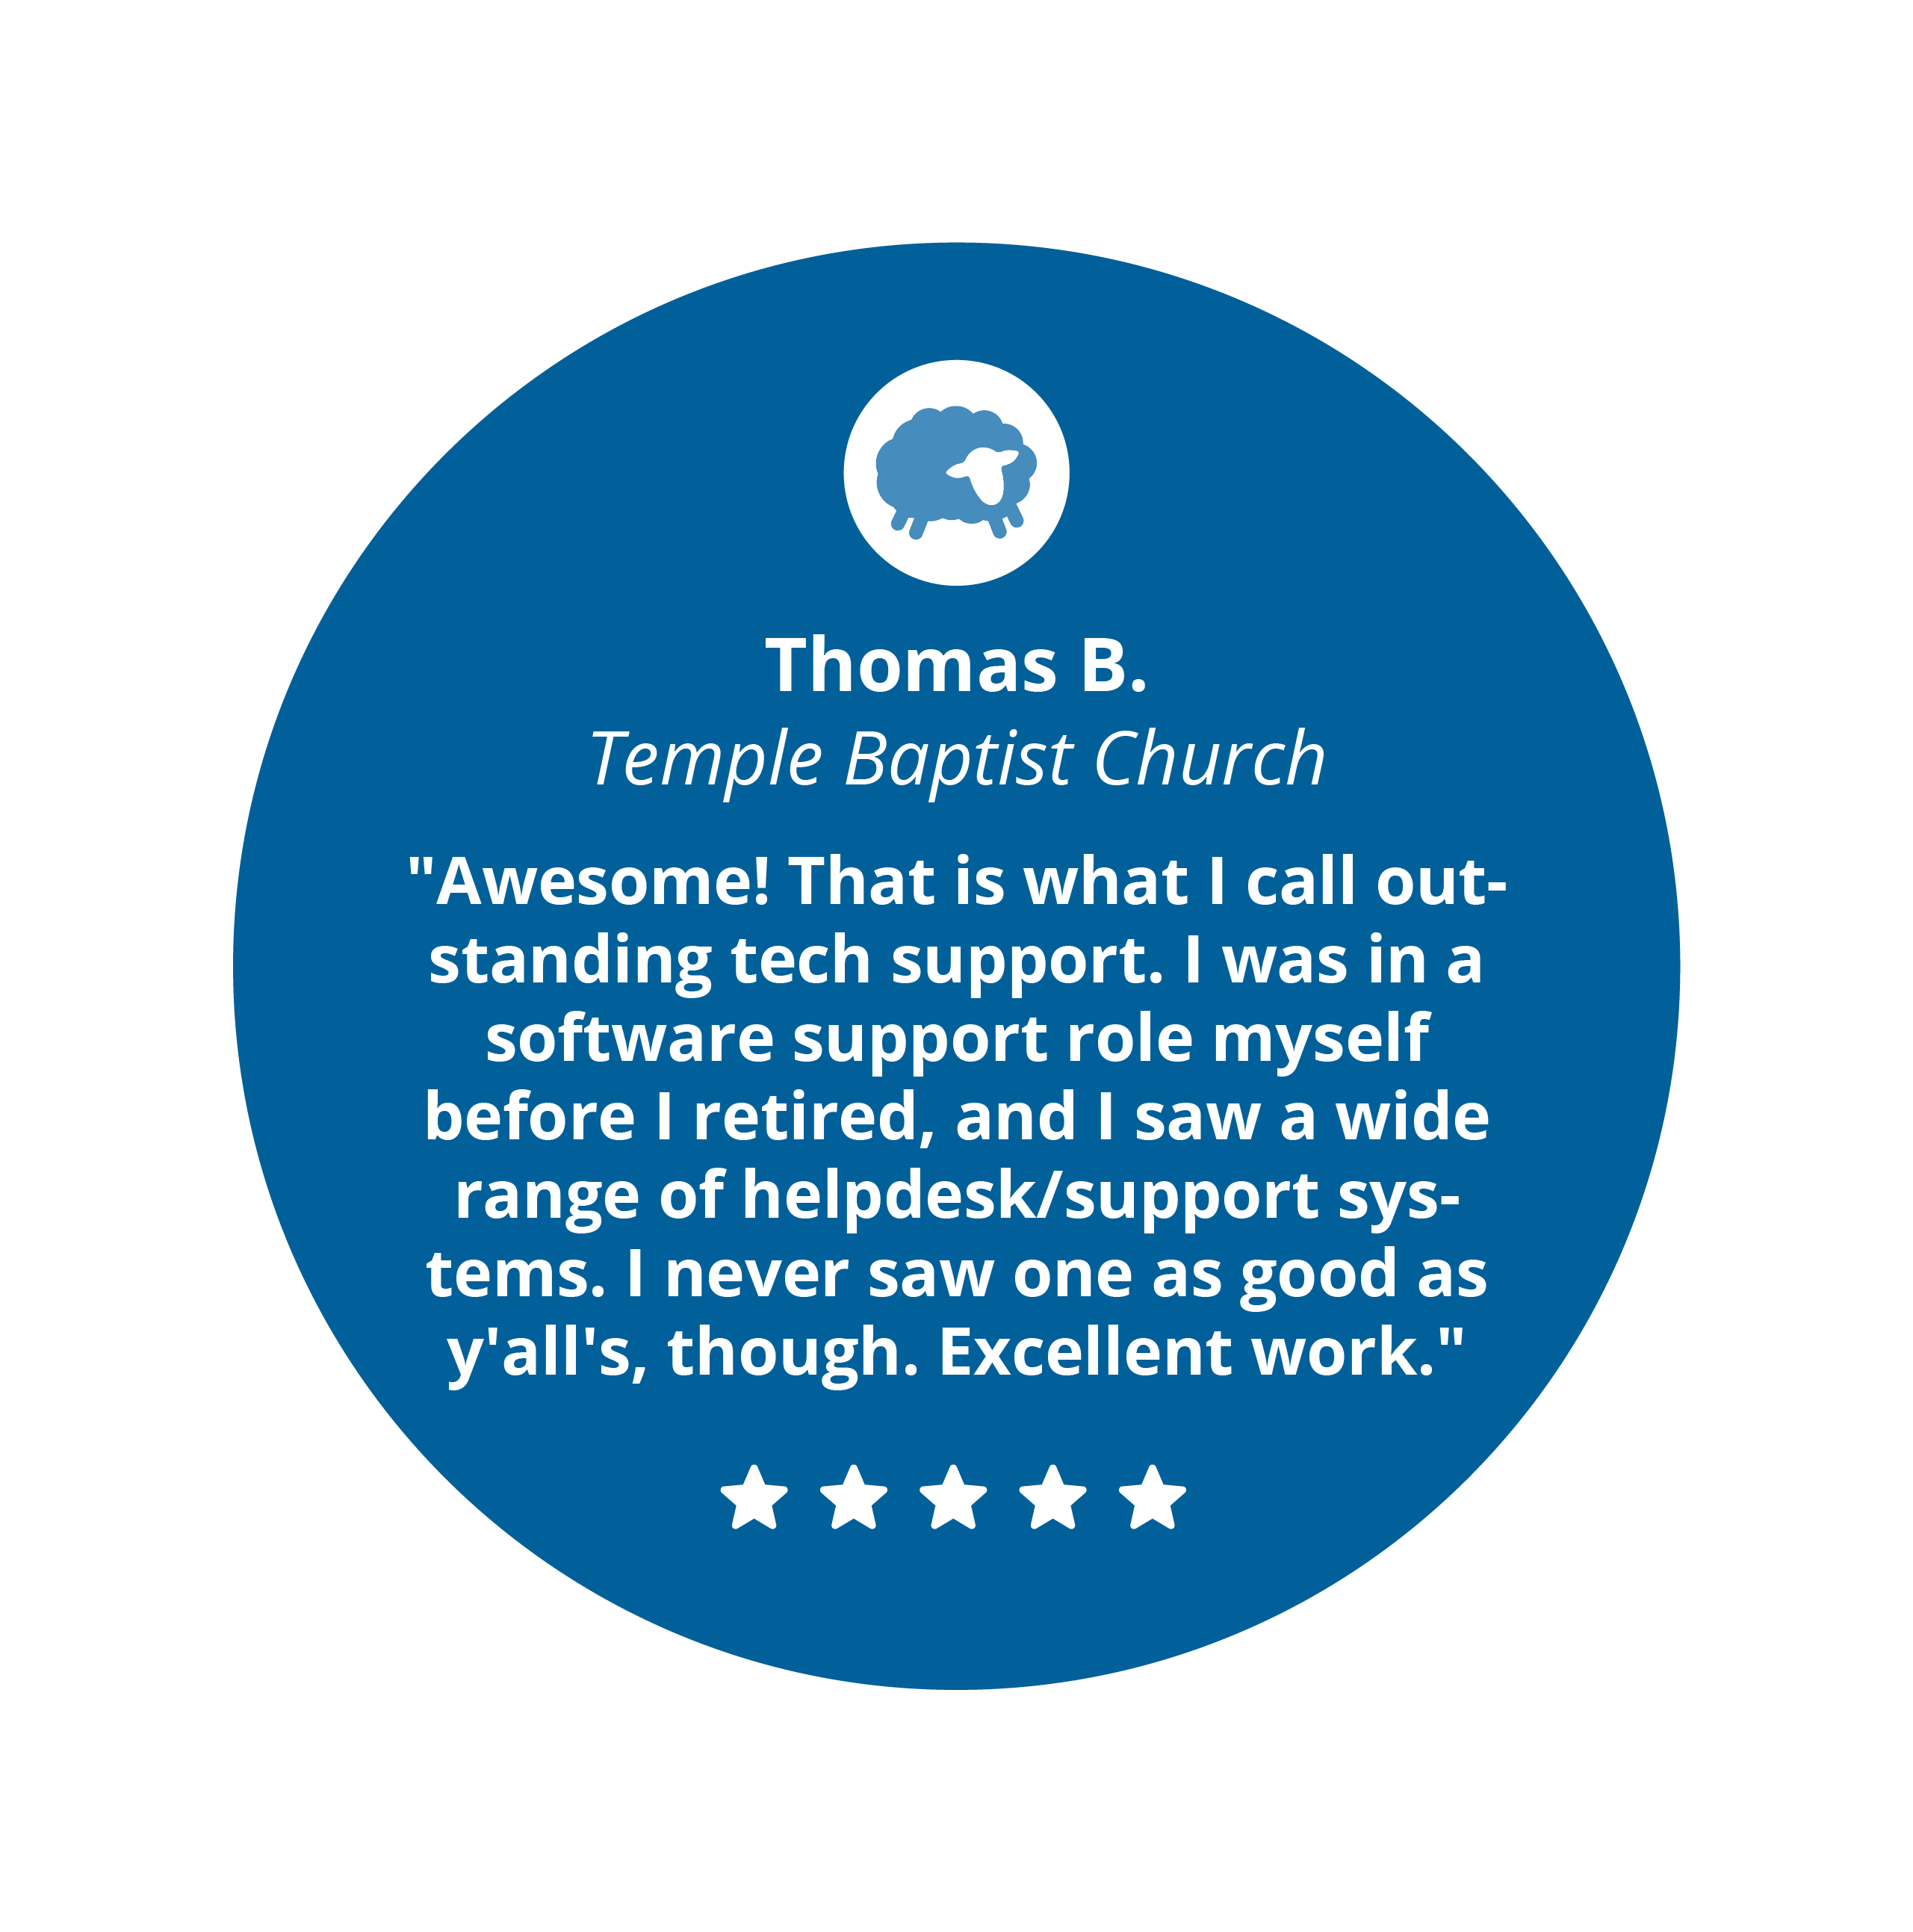 5 star review from Thomas B. from Temple Baptist Church, "Awesome! That is what I call outstanding tech support. I was in a software support role myself before I retired, and I saw a wide range of helpdesk/support systems. I never saw one as good as y'all's, though. Excellent work."